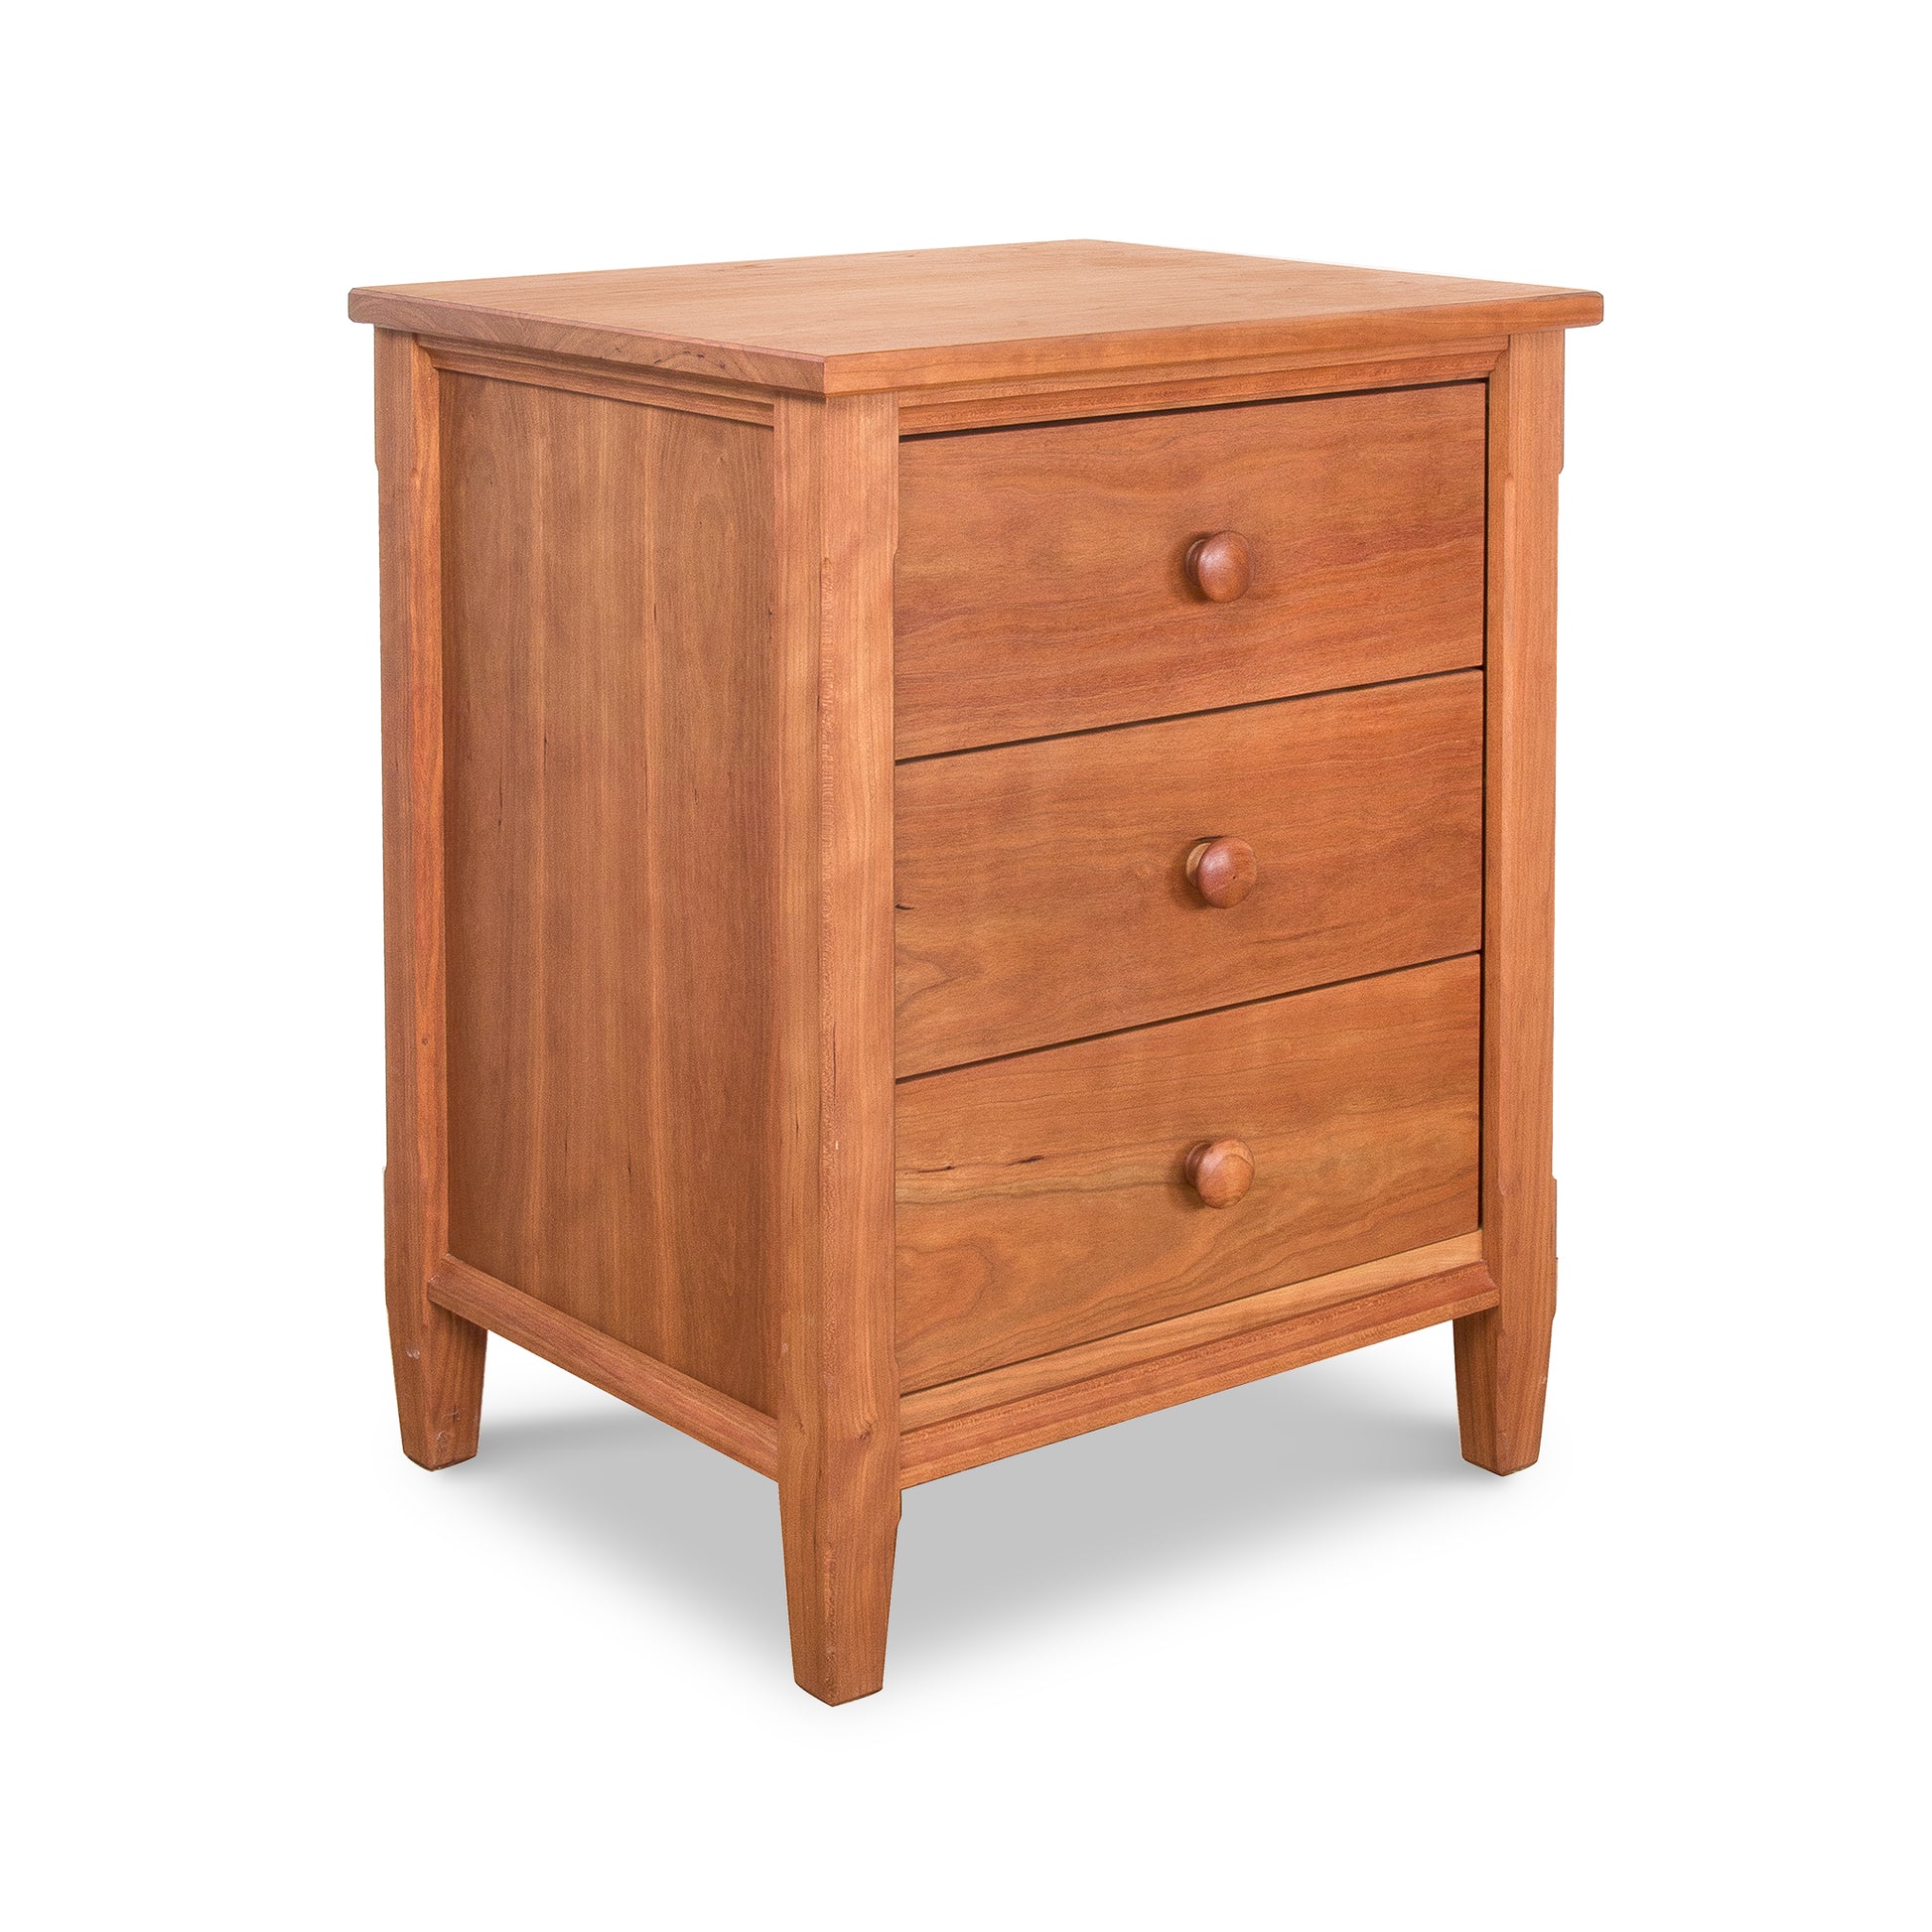 A wooden three-drawer Vermont Shaker Nightstand with round knobs, made from sustainably harvested natural hardwoods, isolated on a white background.